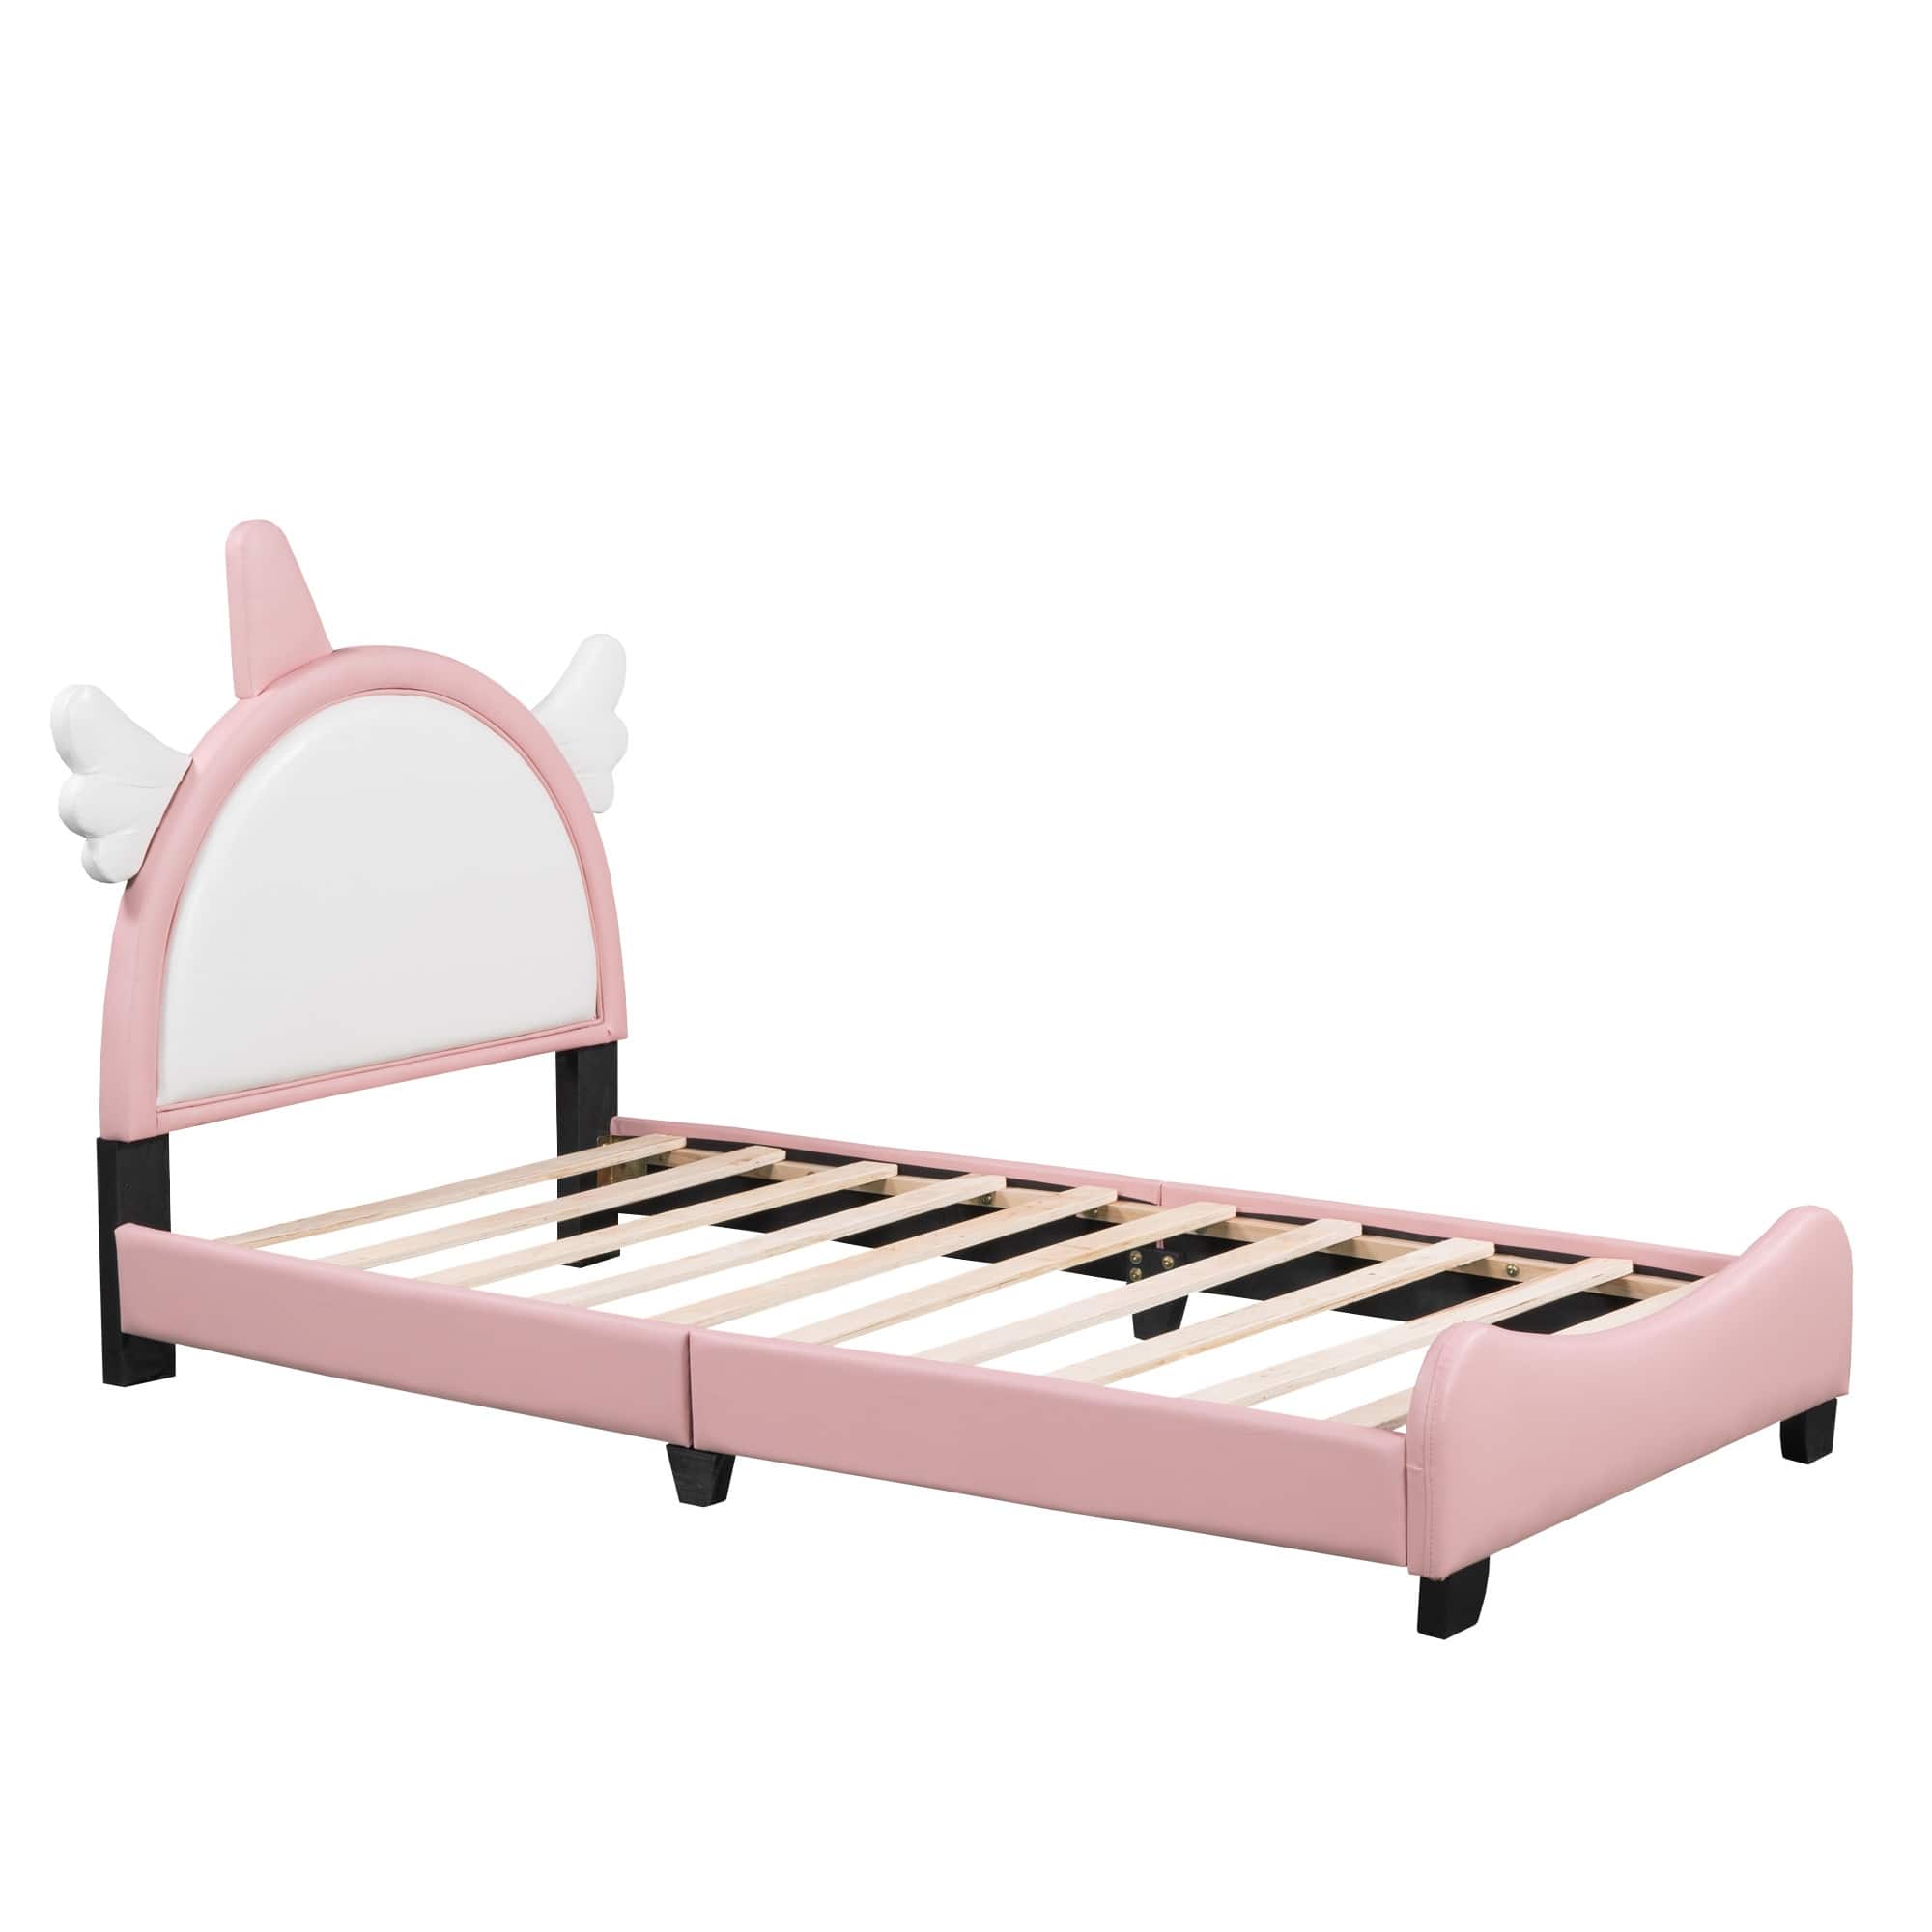 Cute Twin Size Upholstered Bed - Bed Bath & Beyond - 38295264